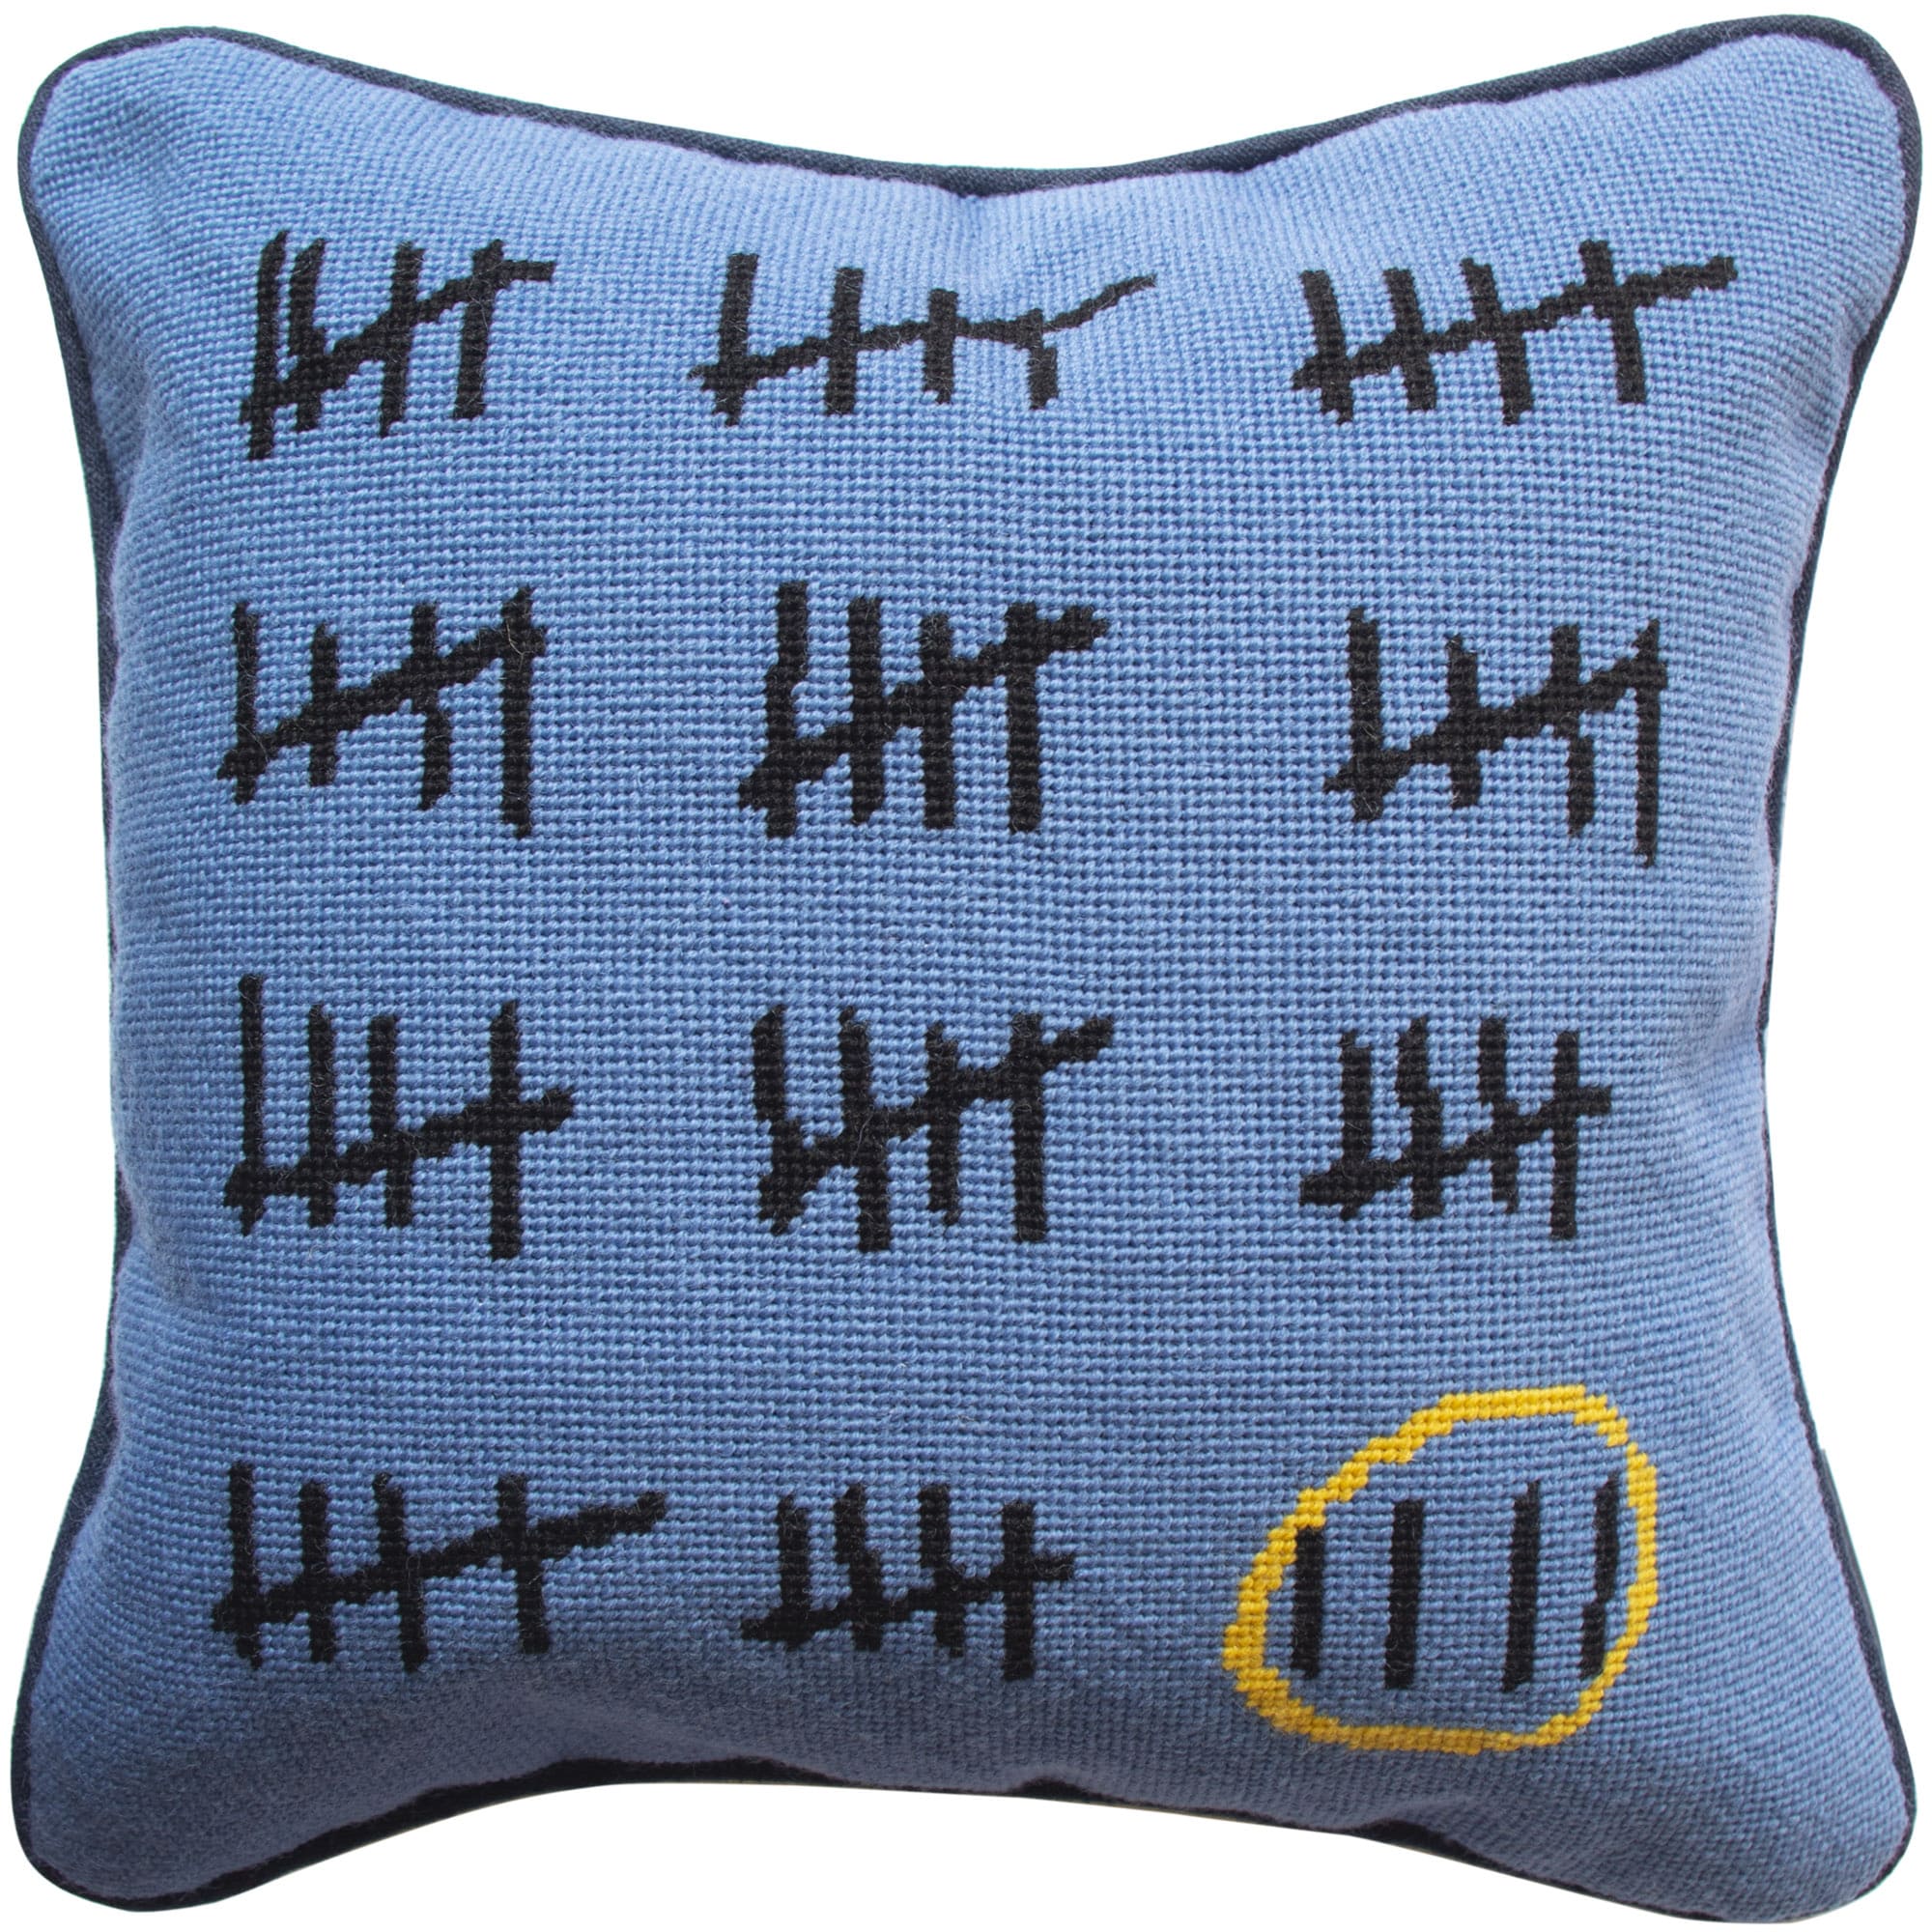 Fine_Cell_Work_Prison_Calendar_Cushion_Hand-Stitched_Wool_Needlepoint_AA_Gill_Blue_Yellow_Black.jpg